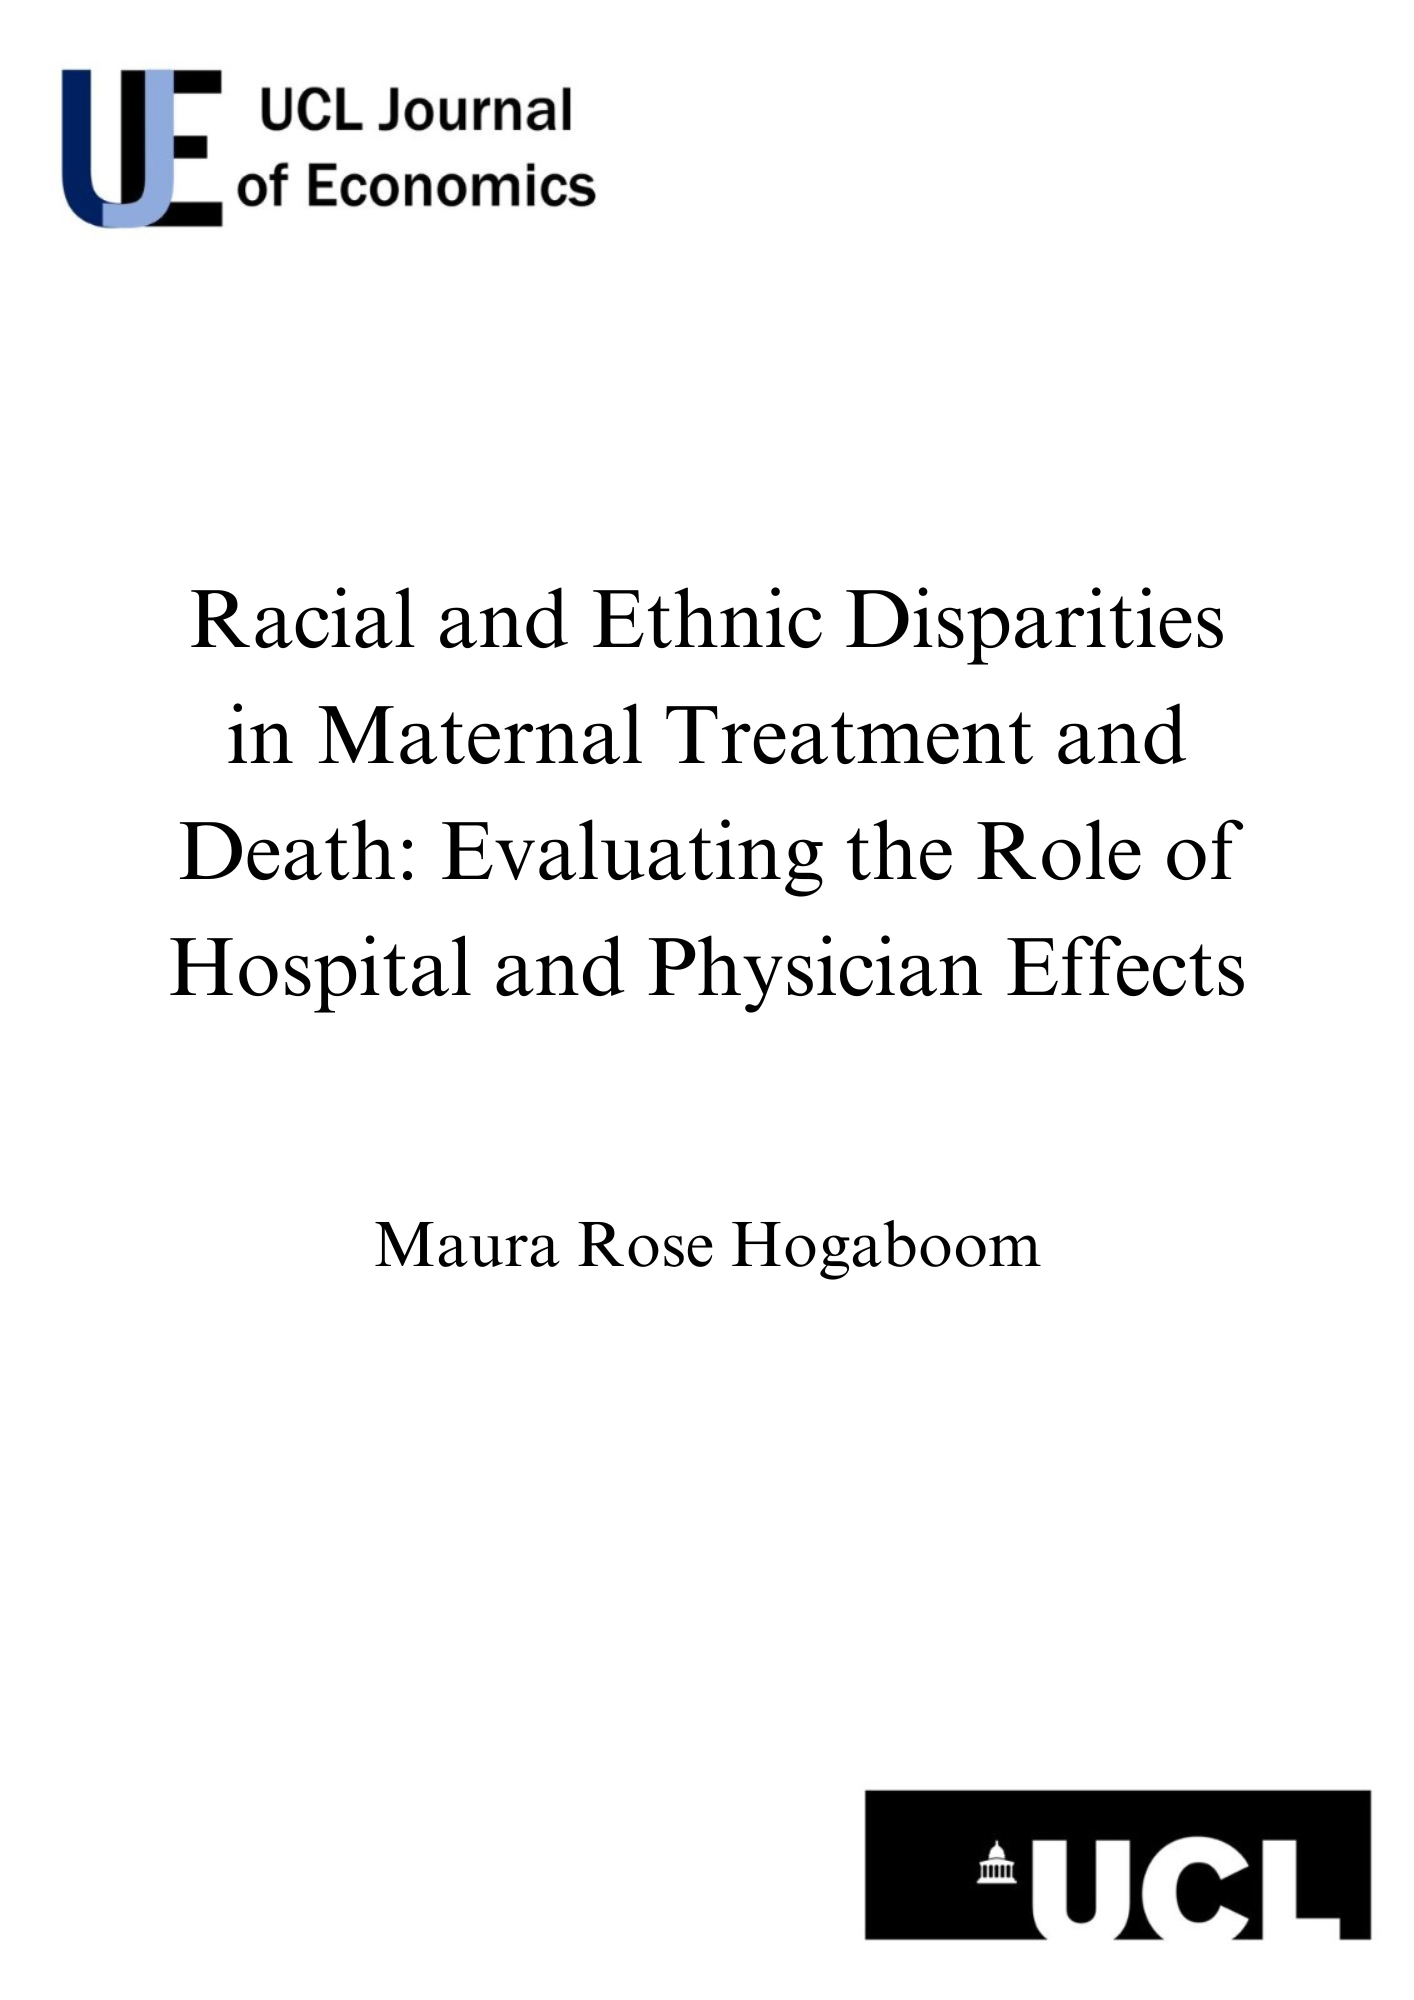 Racial and Ethnic Disparities in Maternal Treatment and Death: Evaluating the Role of Hospital and Physician Effects